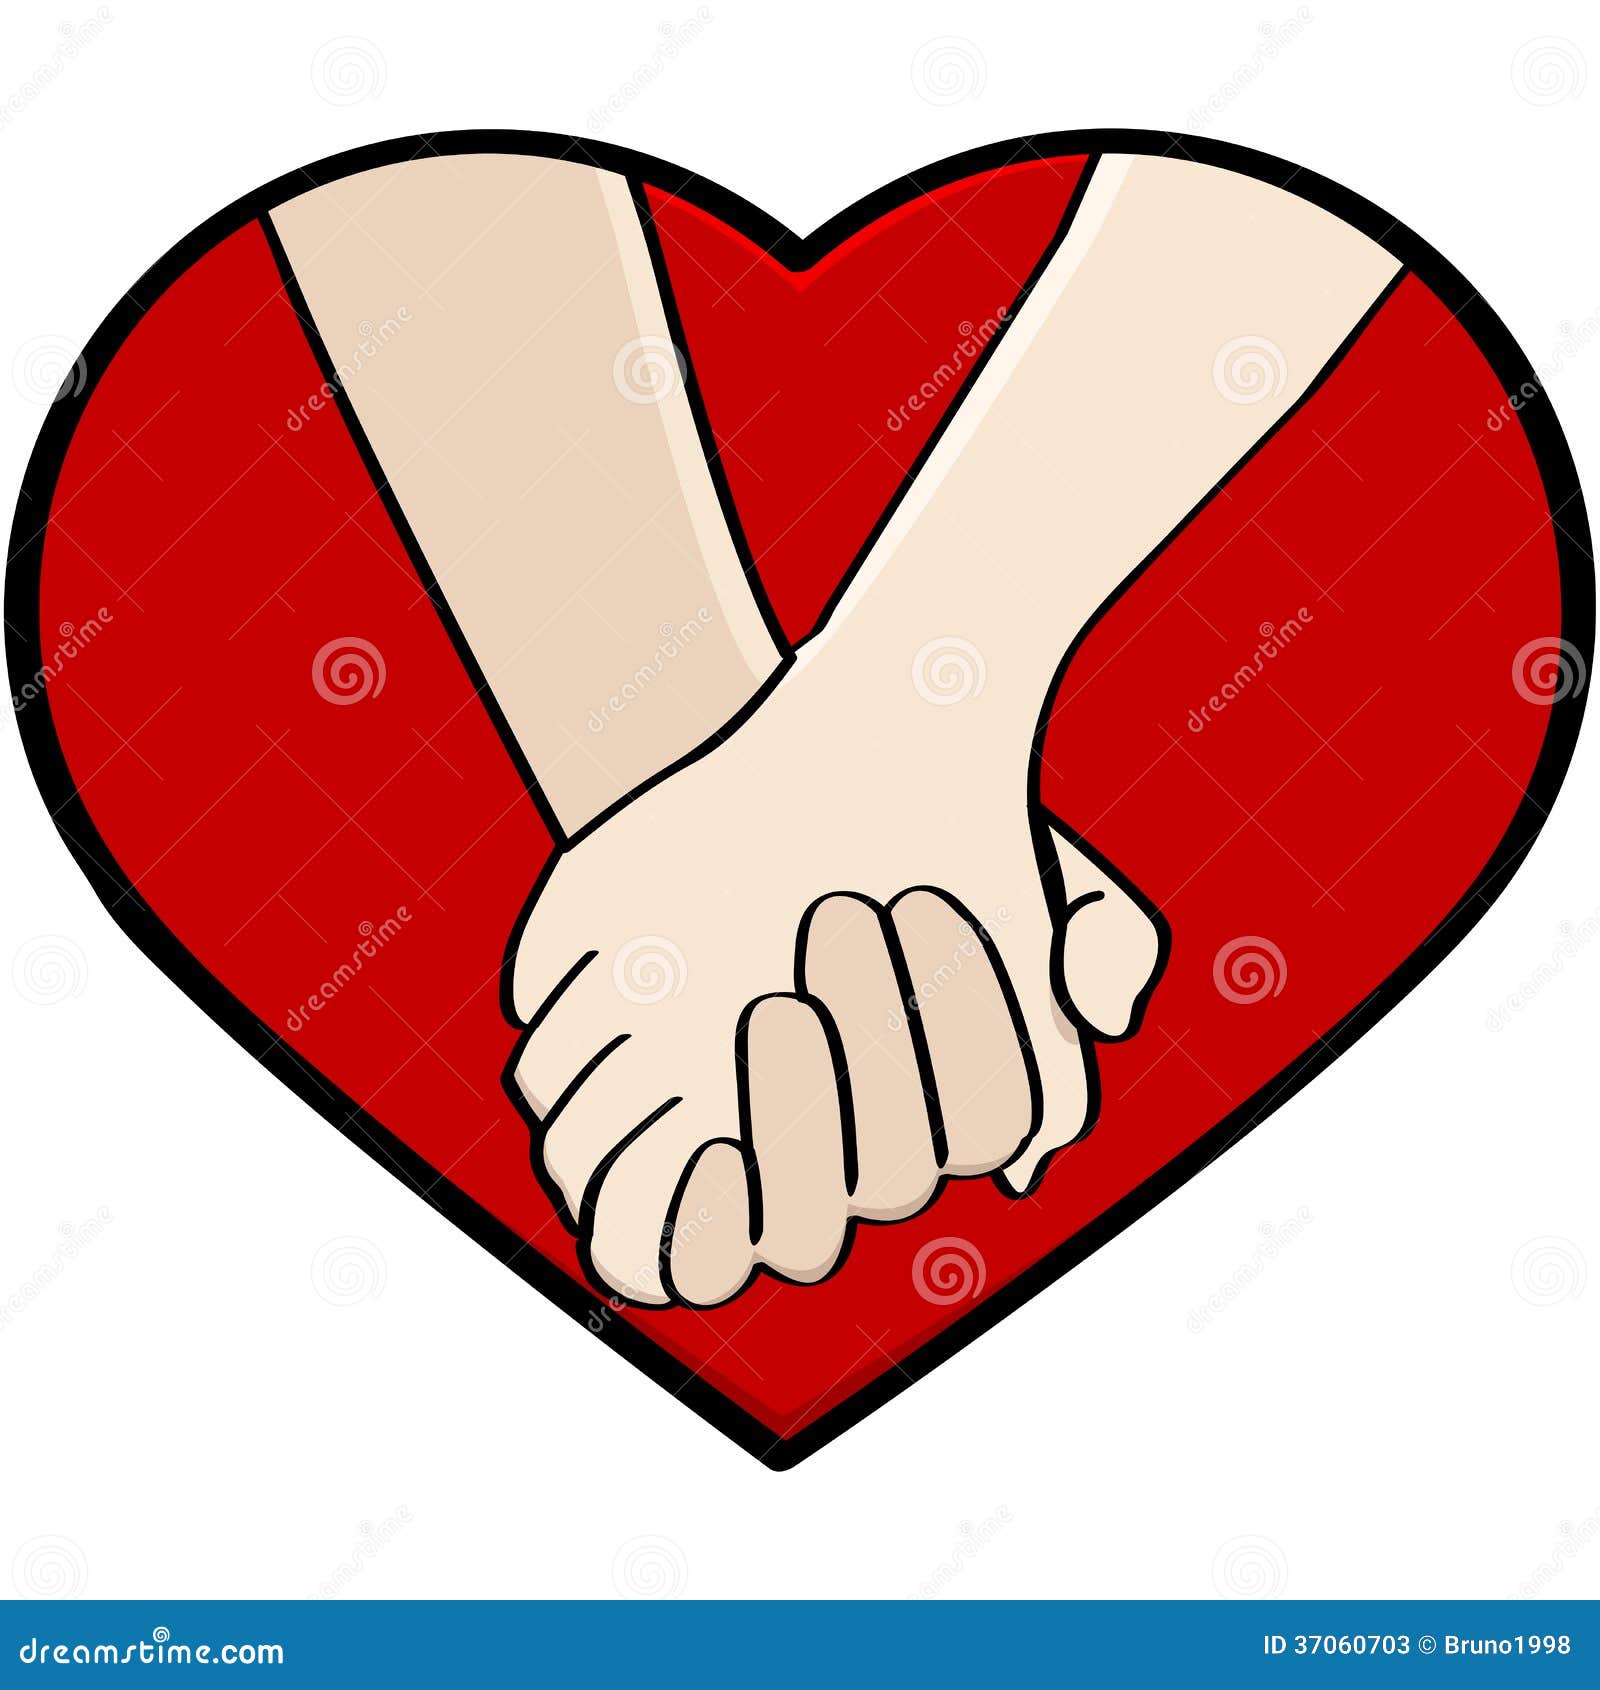 Holding Hands Stock Photos - Image: 37060703